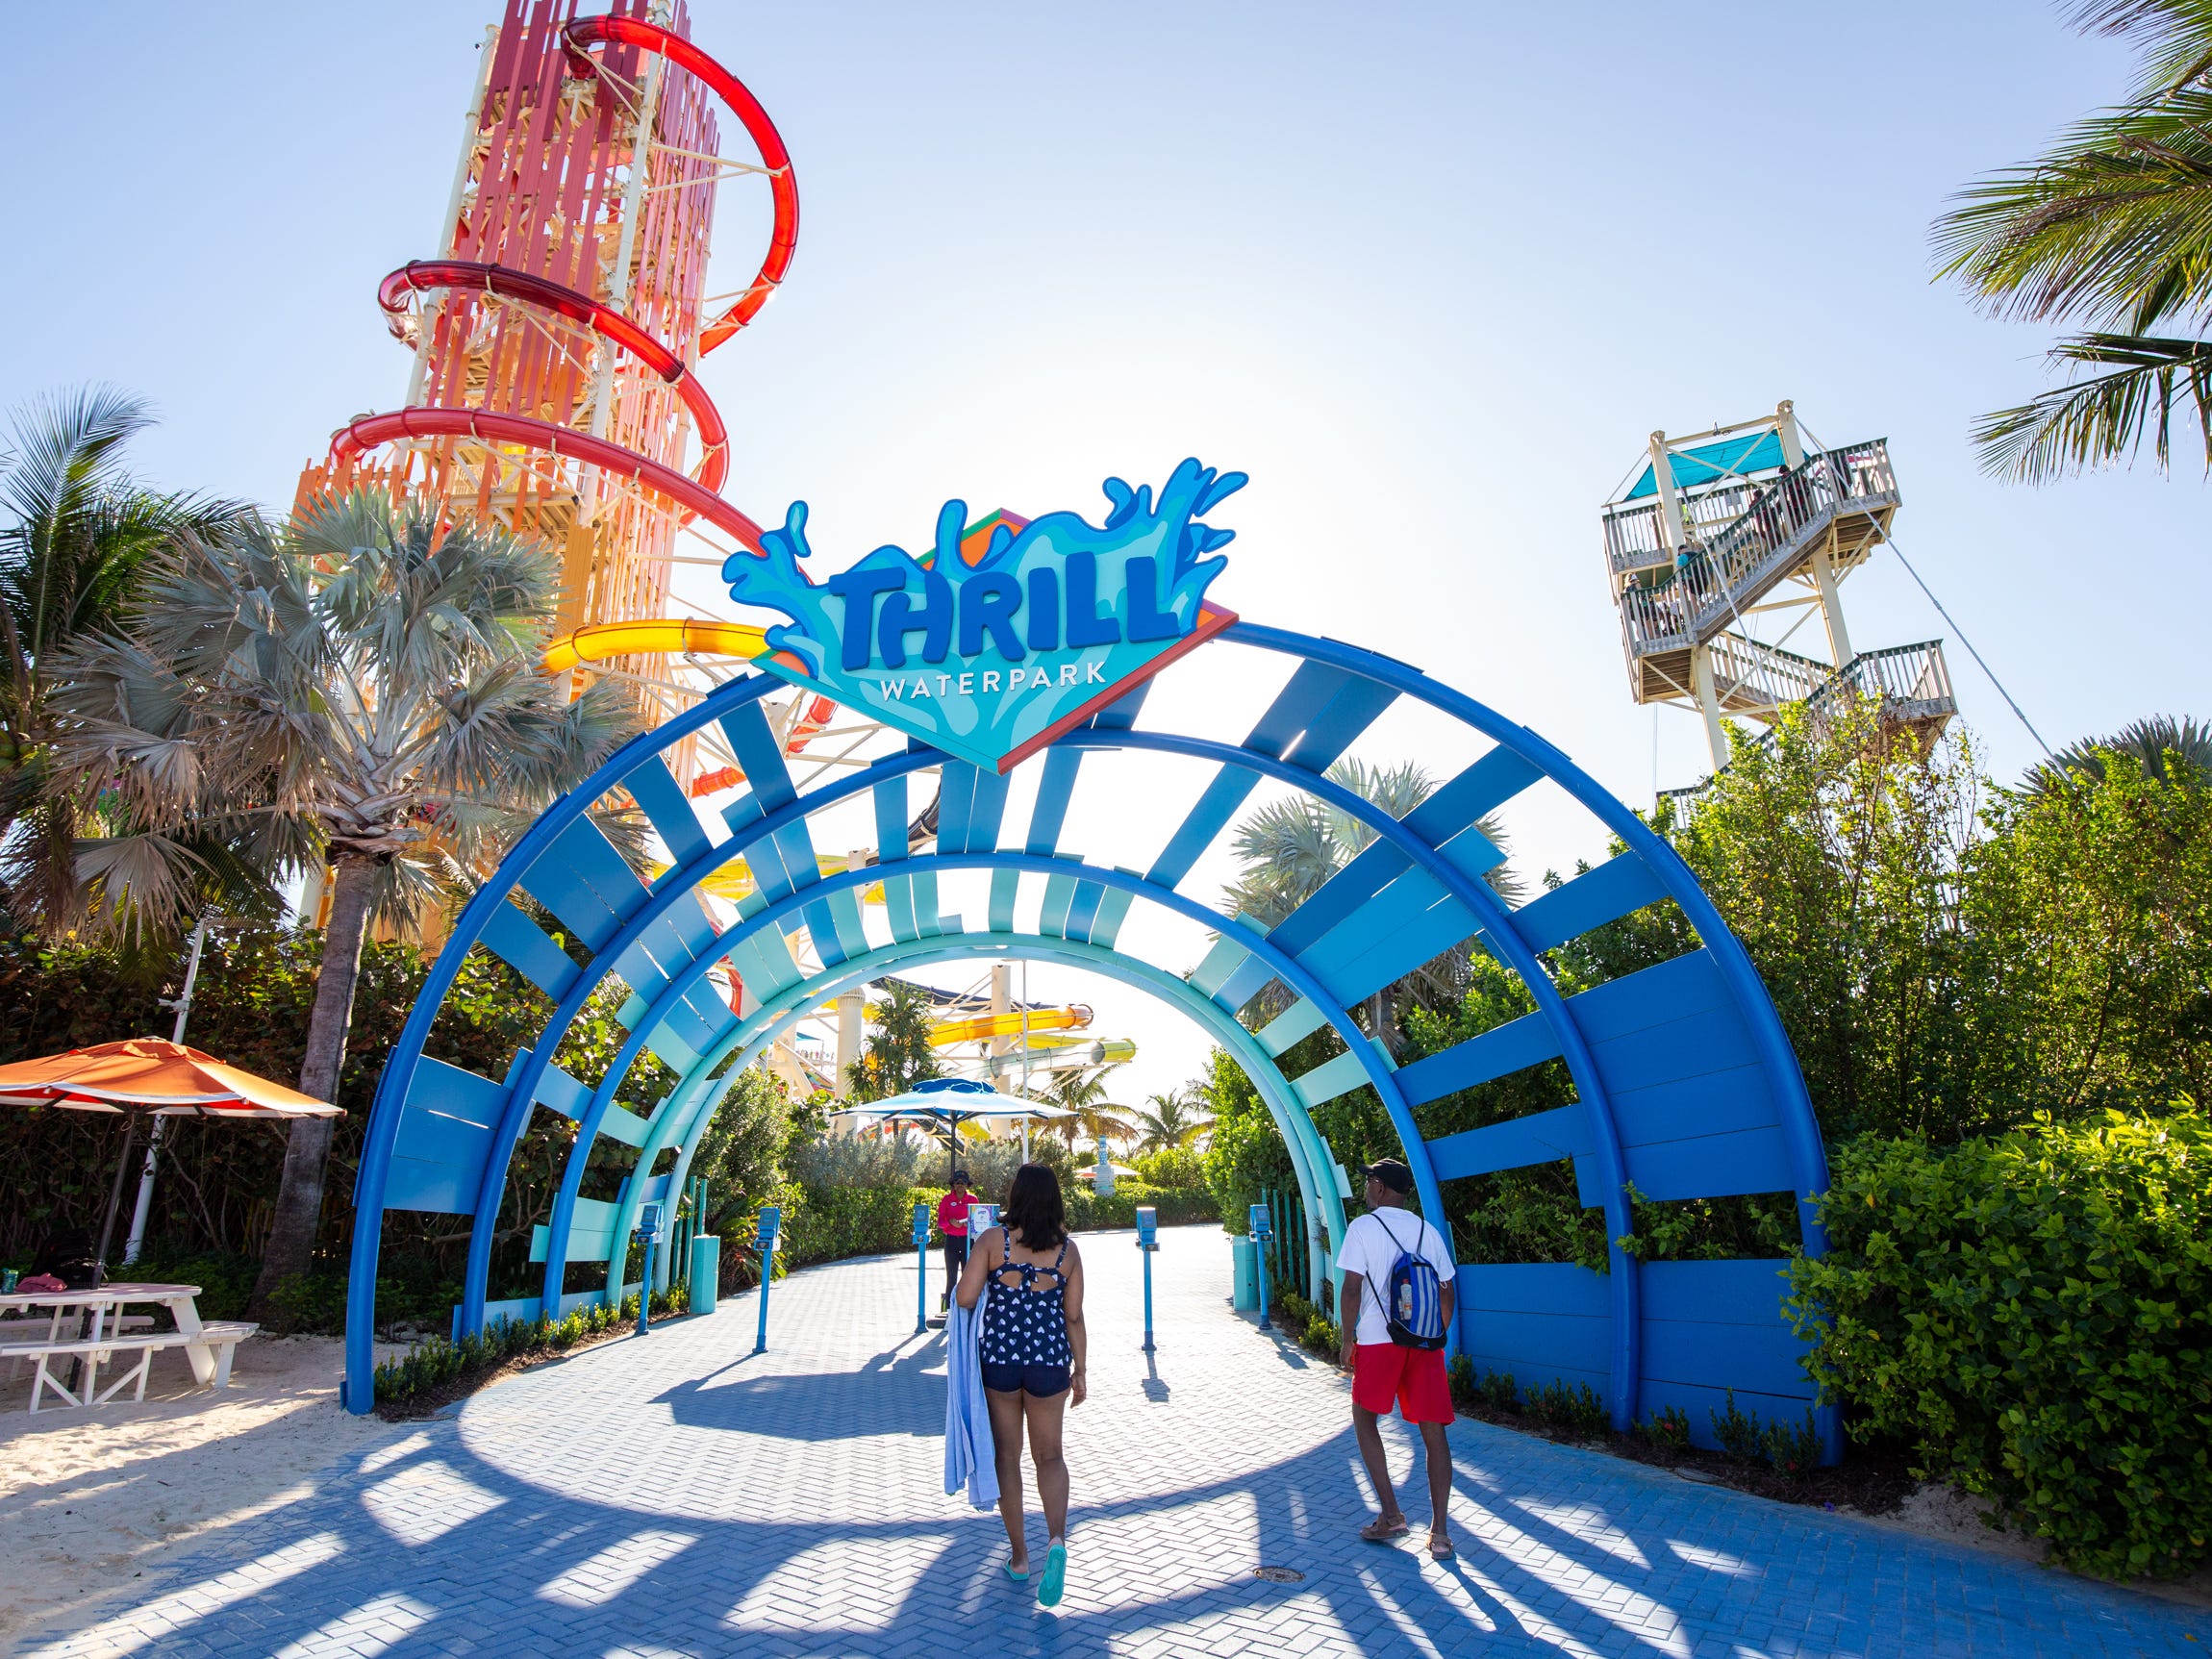 Like Royal Caribbean's newer cruise ships, Perfect Day at CocoCay has several "neighborhoods," or sections, that appeal to different travelers of varying ages.